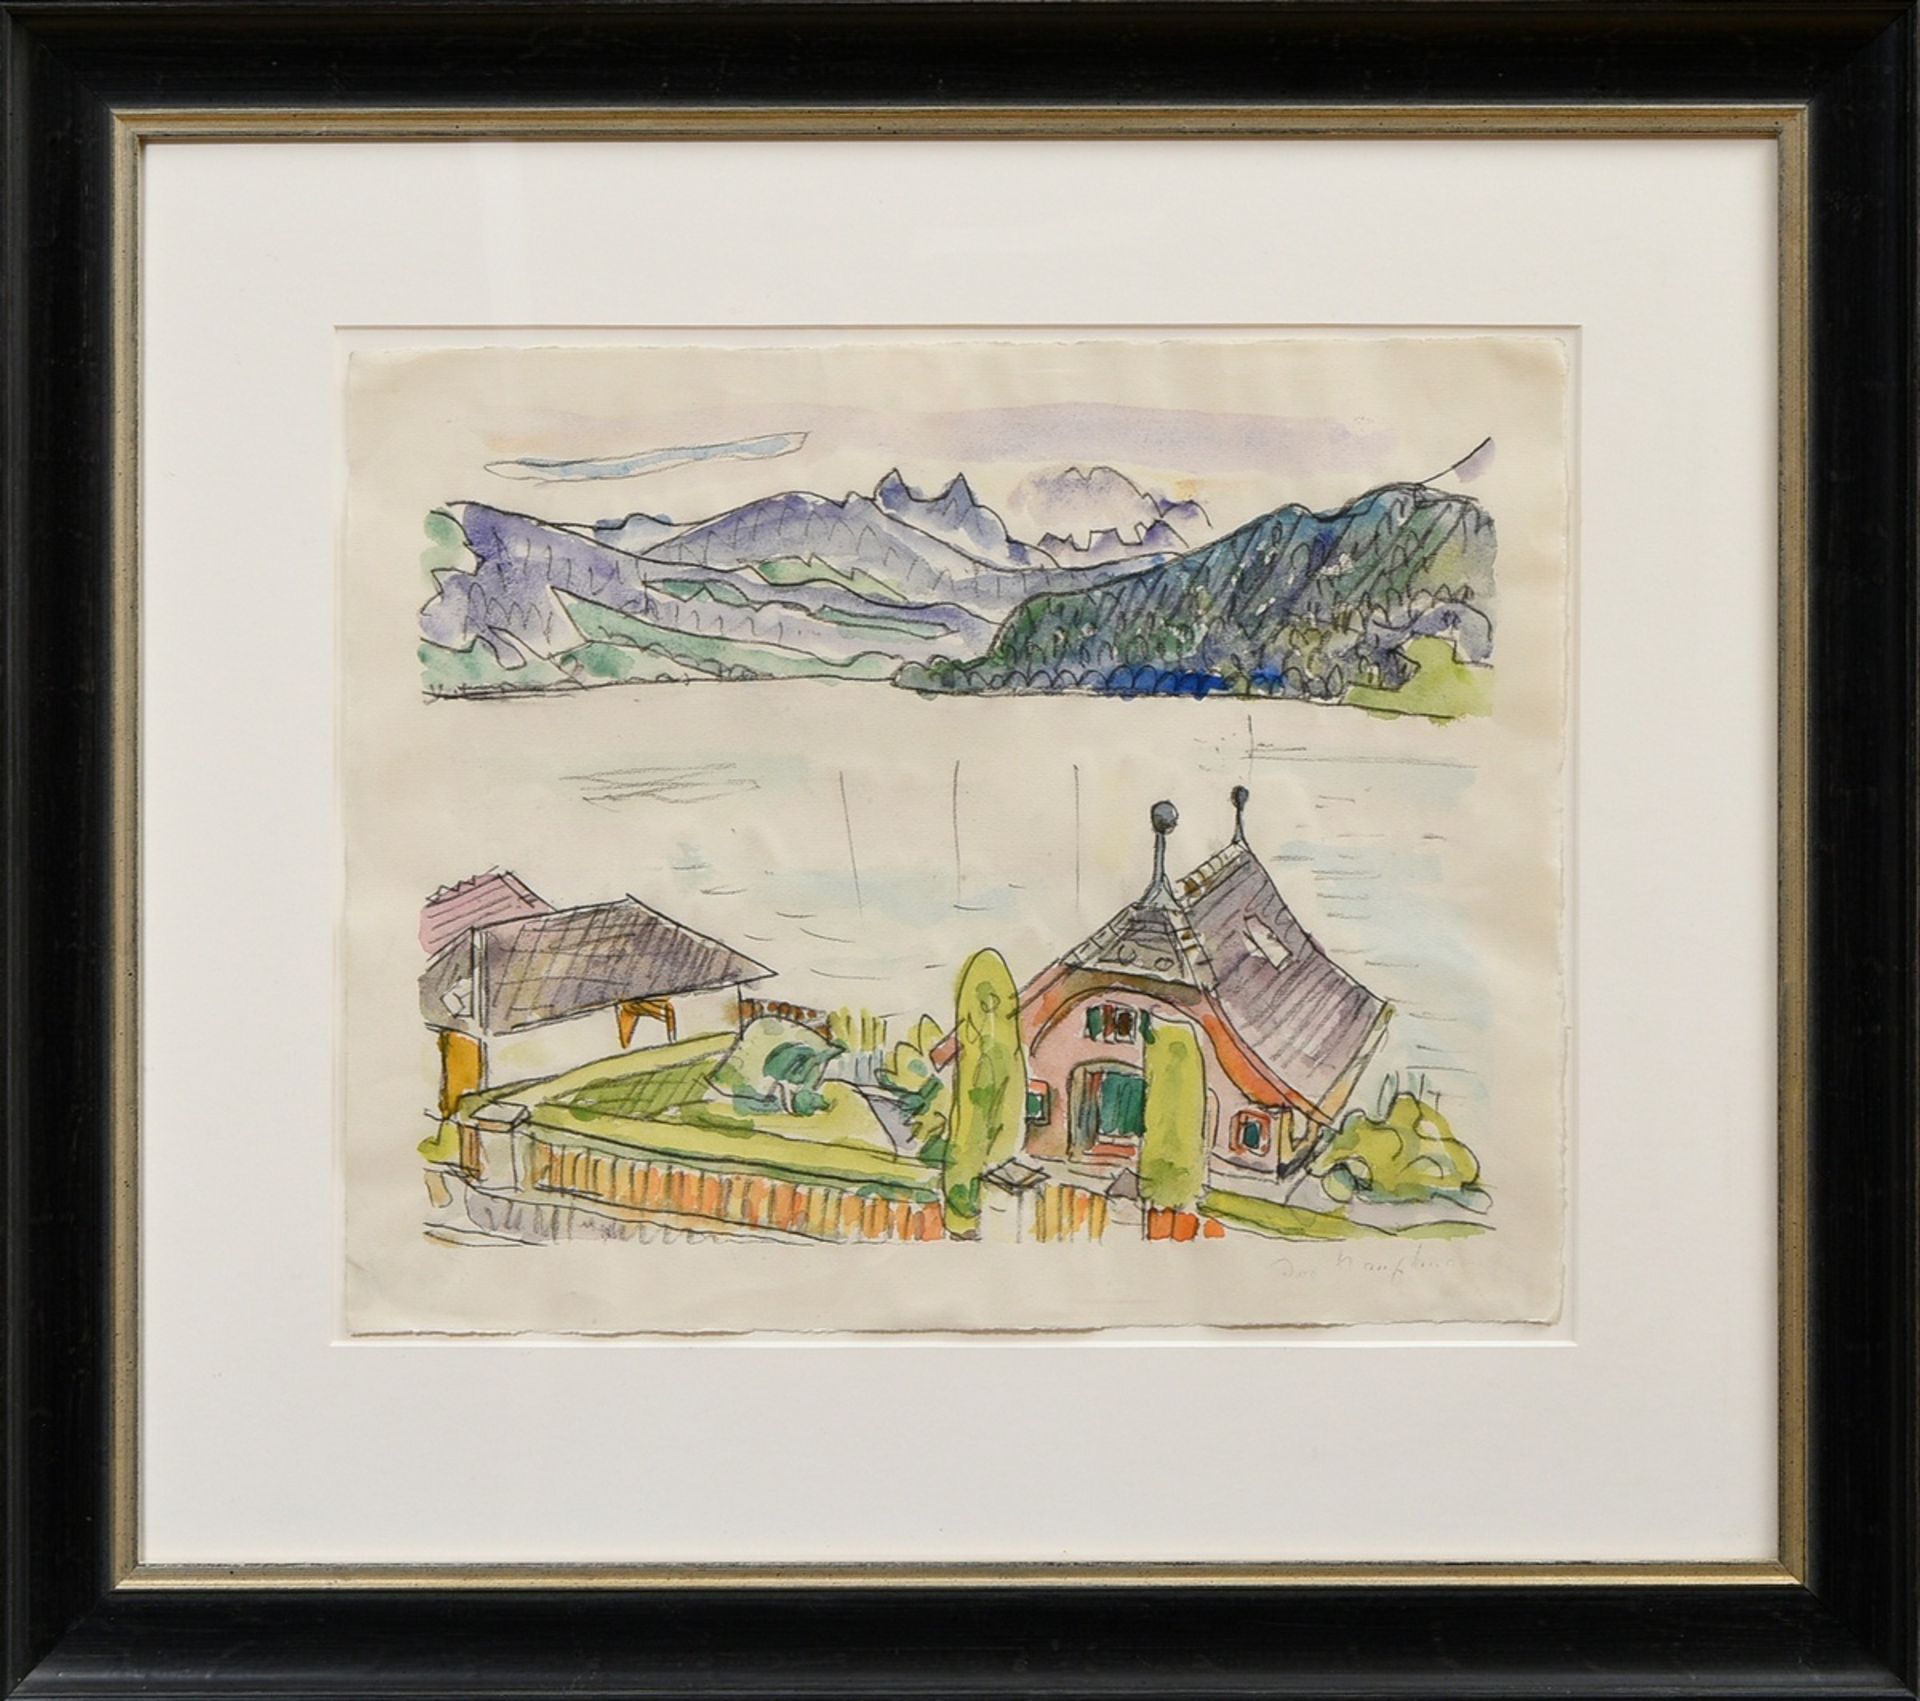 Hauptmann, Ivo (1886-1973) "Gardasee"(?), charcoal/watercolour, sign. lower right, SM 38,2x46,4cm ( - Image 2 of 3